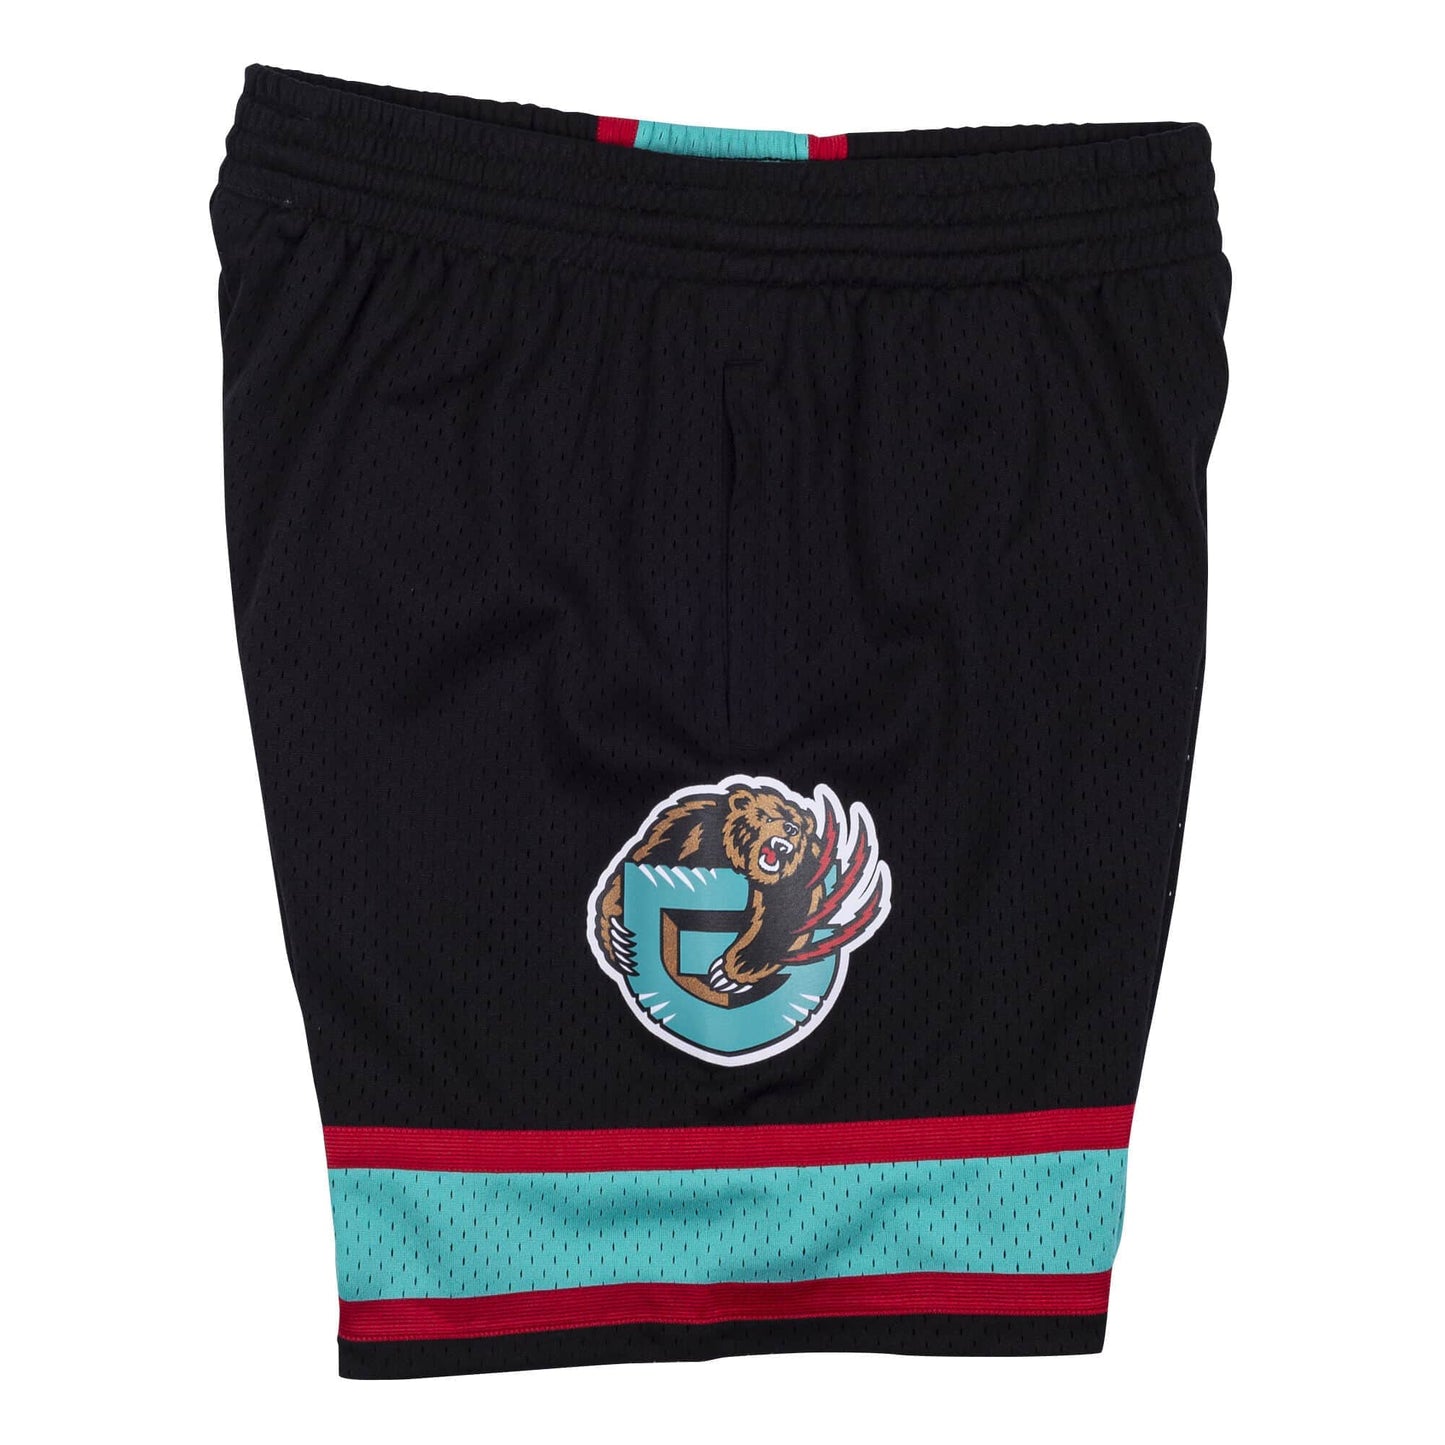 Vancouver Grizzlies Mitchell and Ness Swingman Shorts - (2001-02)